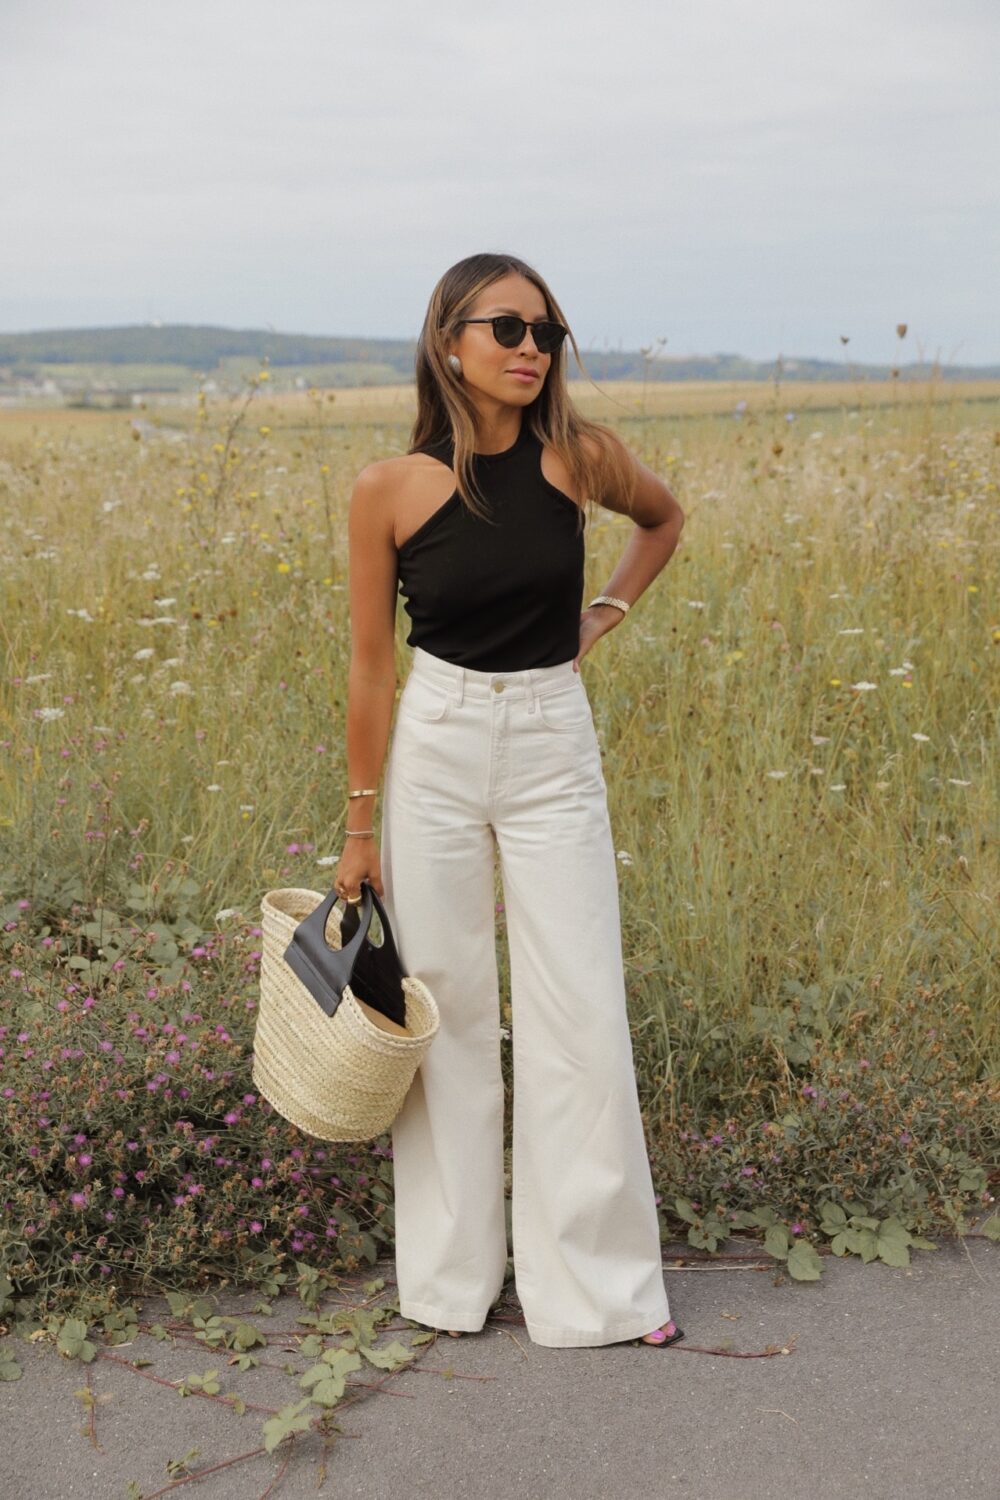 A Black & White outfit idea for a chic look! – Sincerely Jules